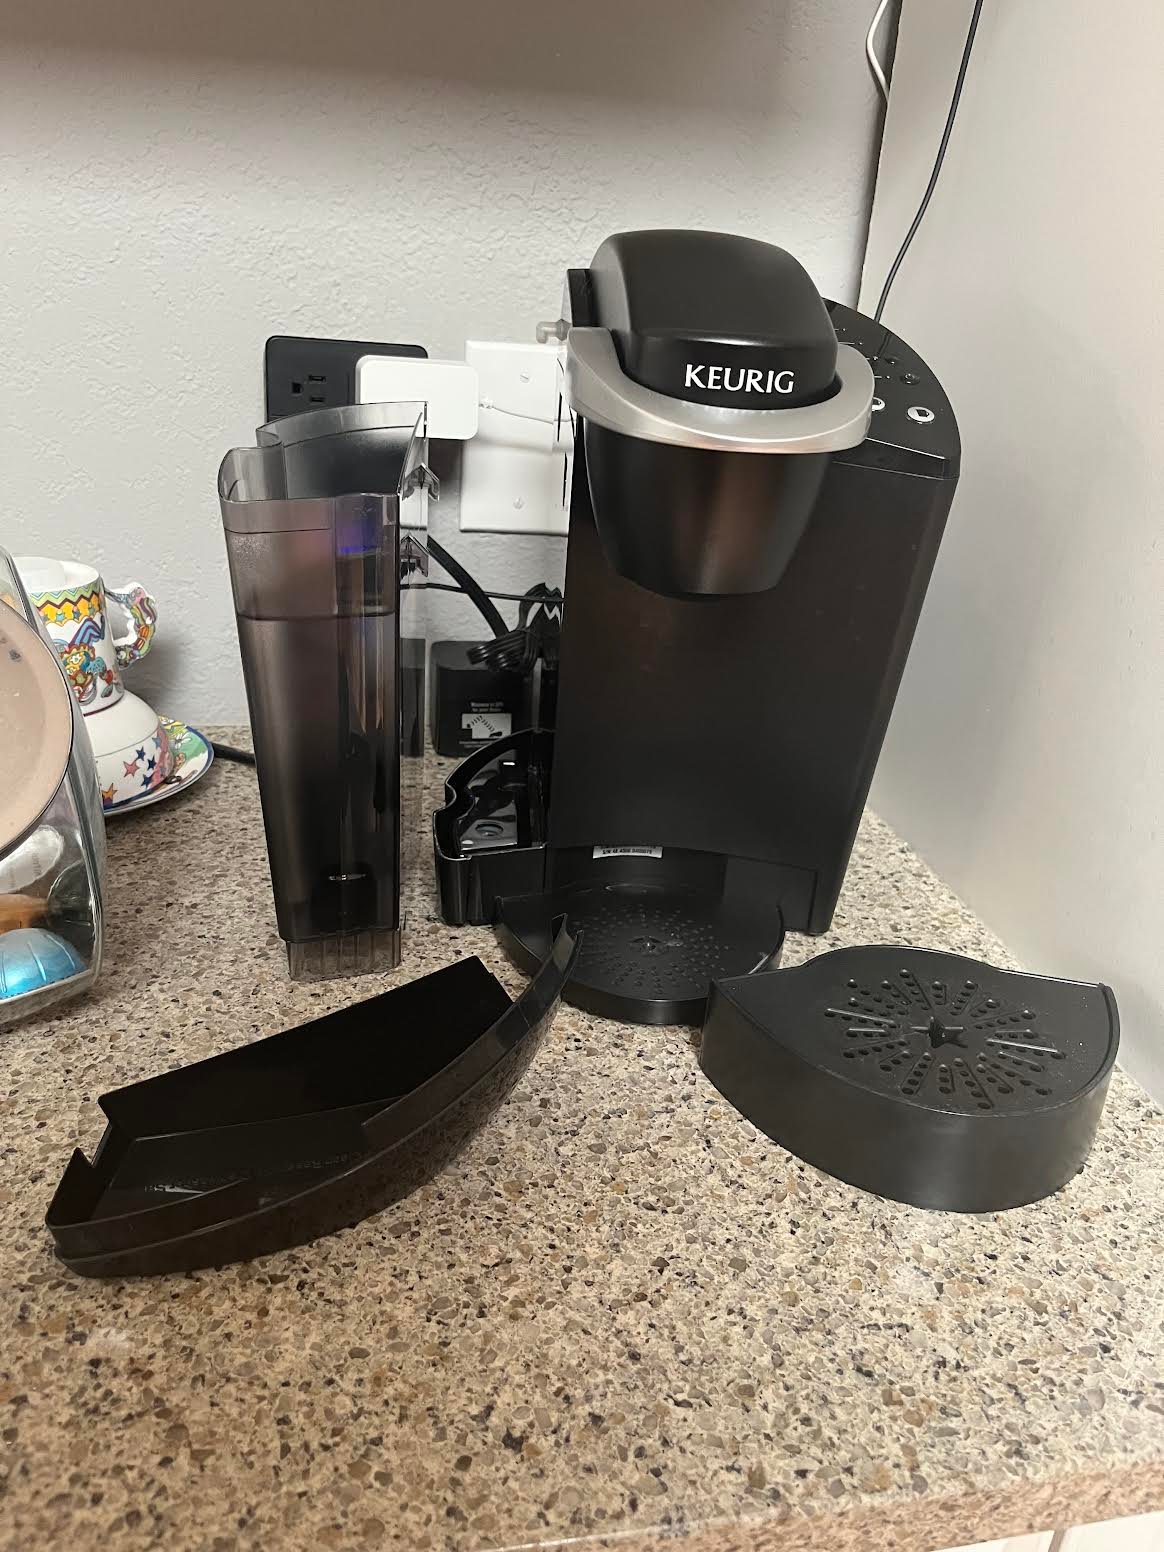 How to Troubleshoot a Keurig Coffee Maker That's Not Dispensing Water